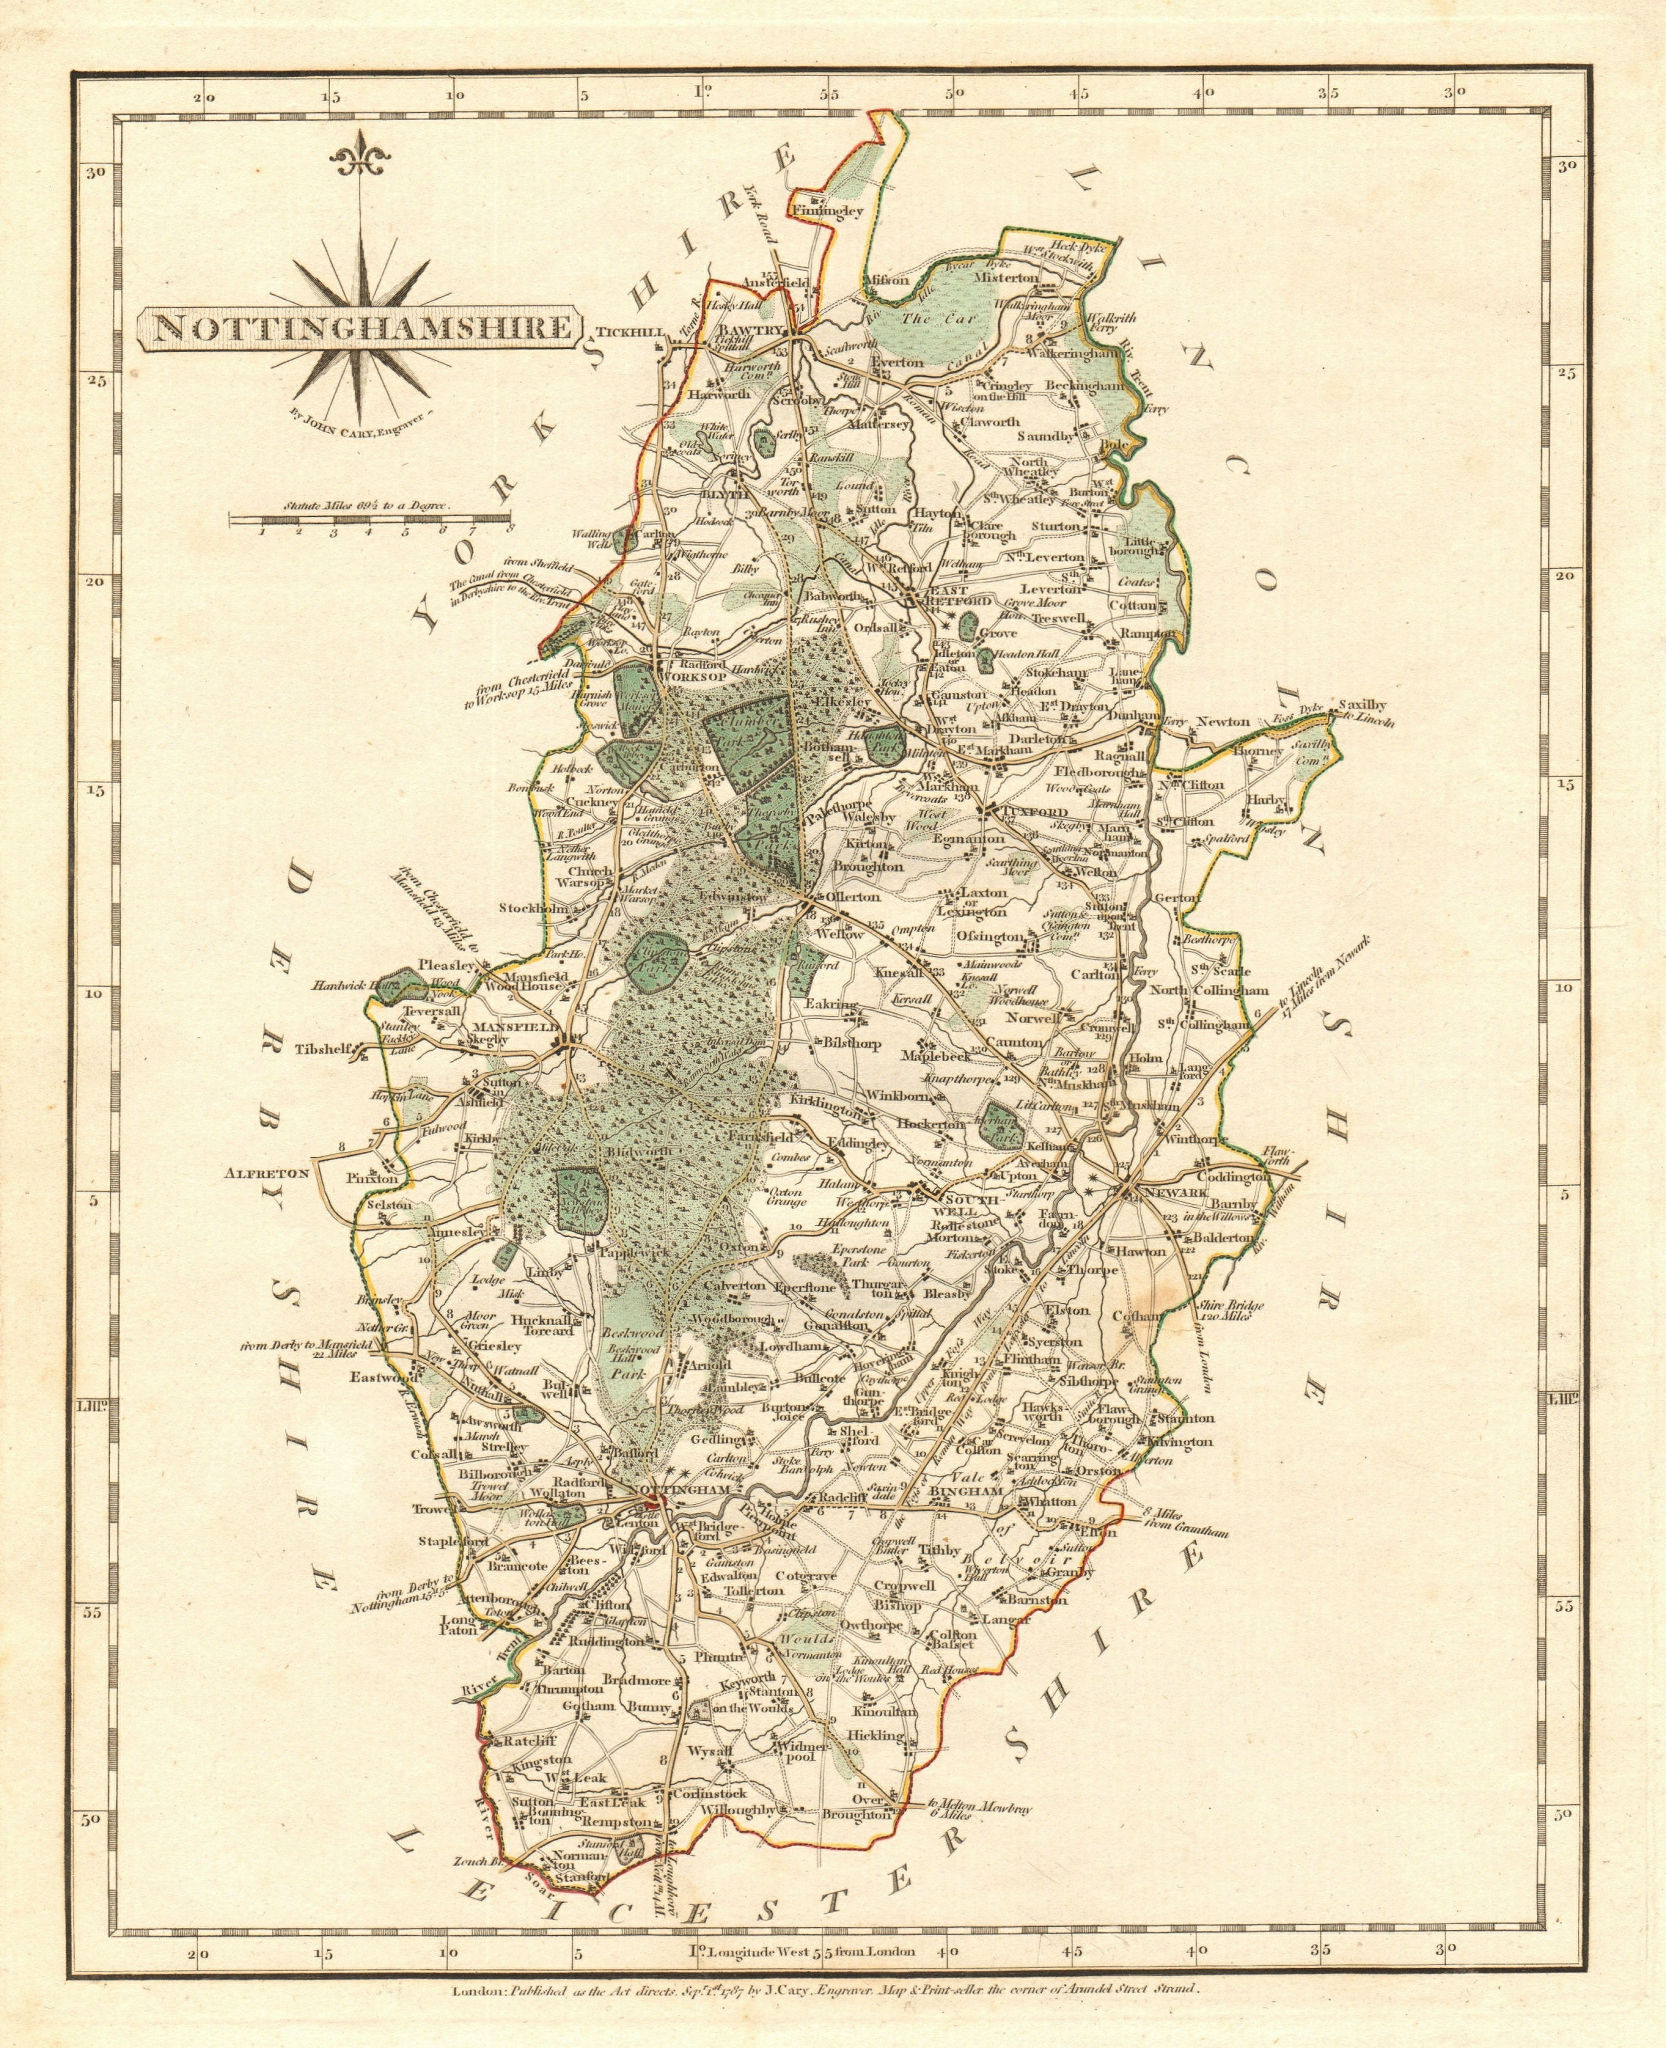 Associate Product Antique county map of NOTTINGHAMSHIRE by JOHN CARY. Original outline colour 1787